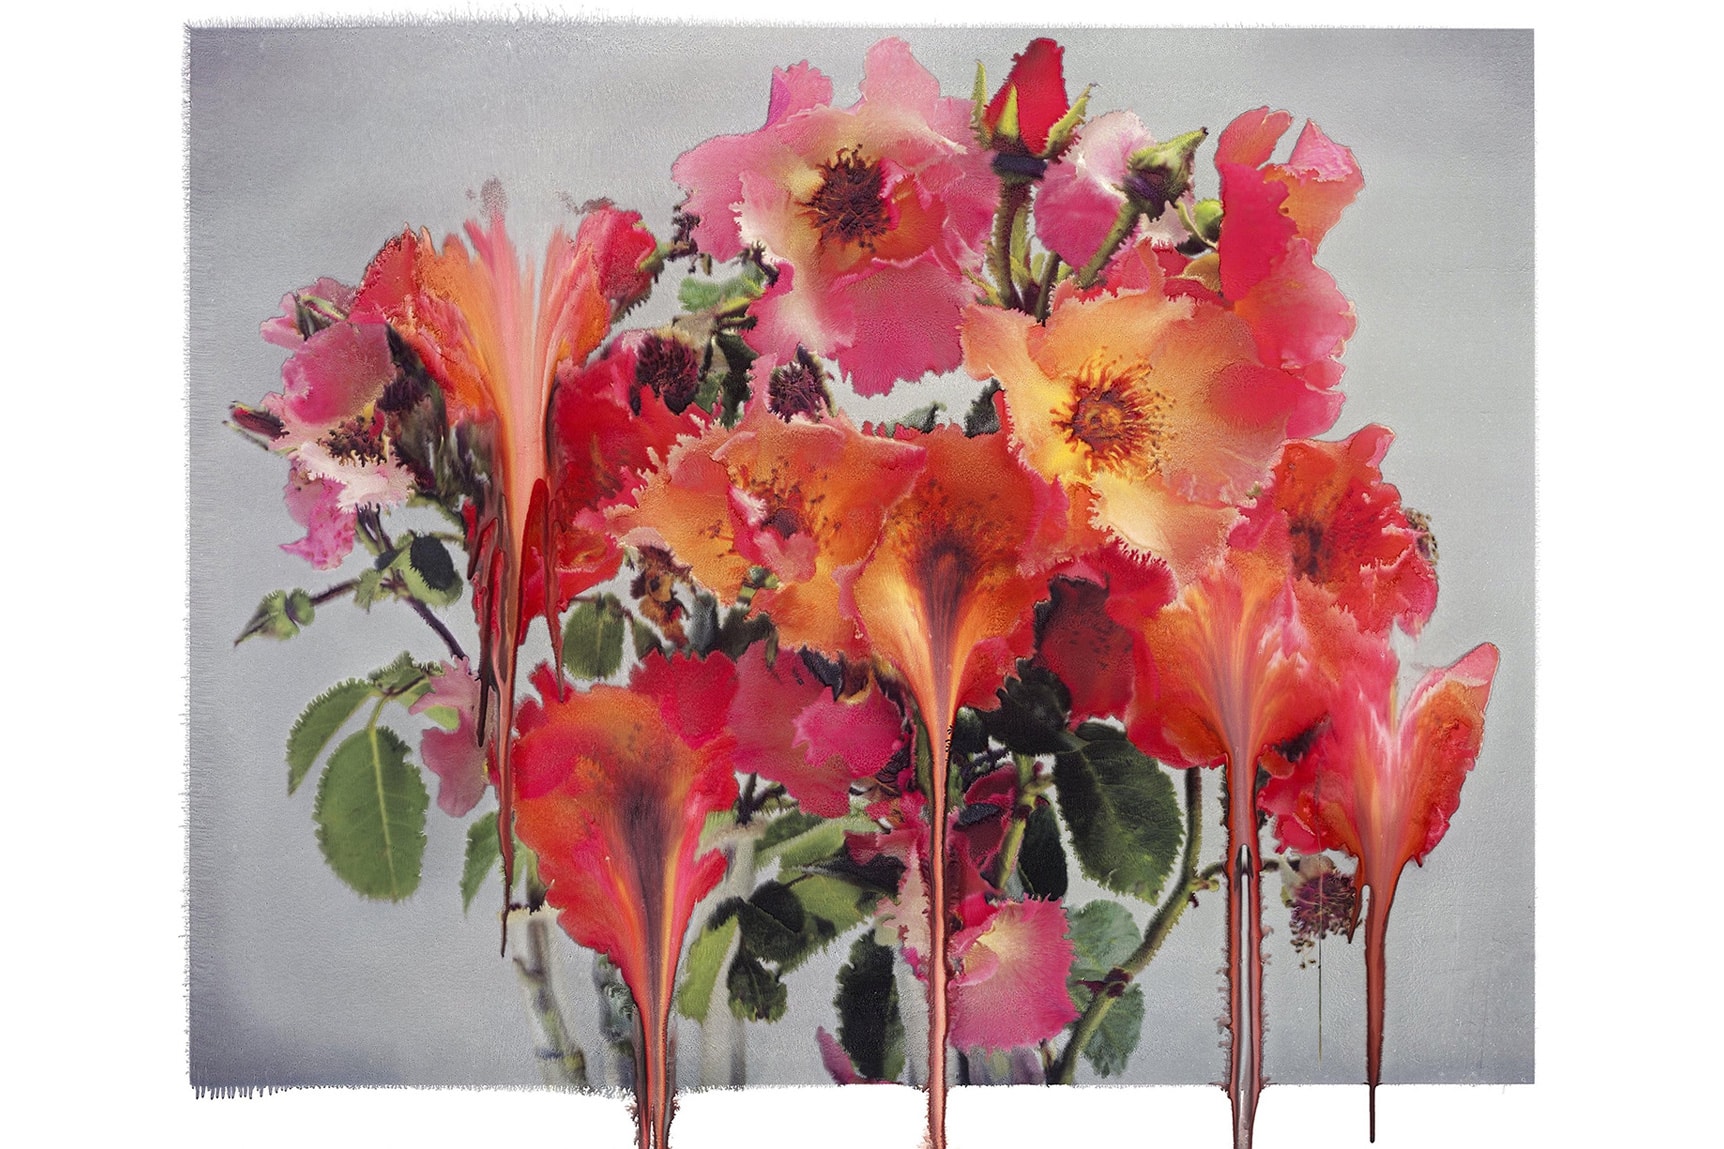 Nick Knight 'Still' Exhibition The Mass Tokyo art Flora, Roses, Photo Paintings, and Roses from My Garden date japan